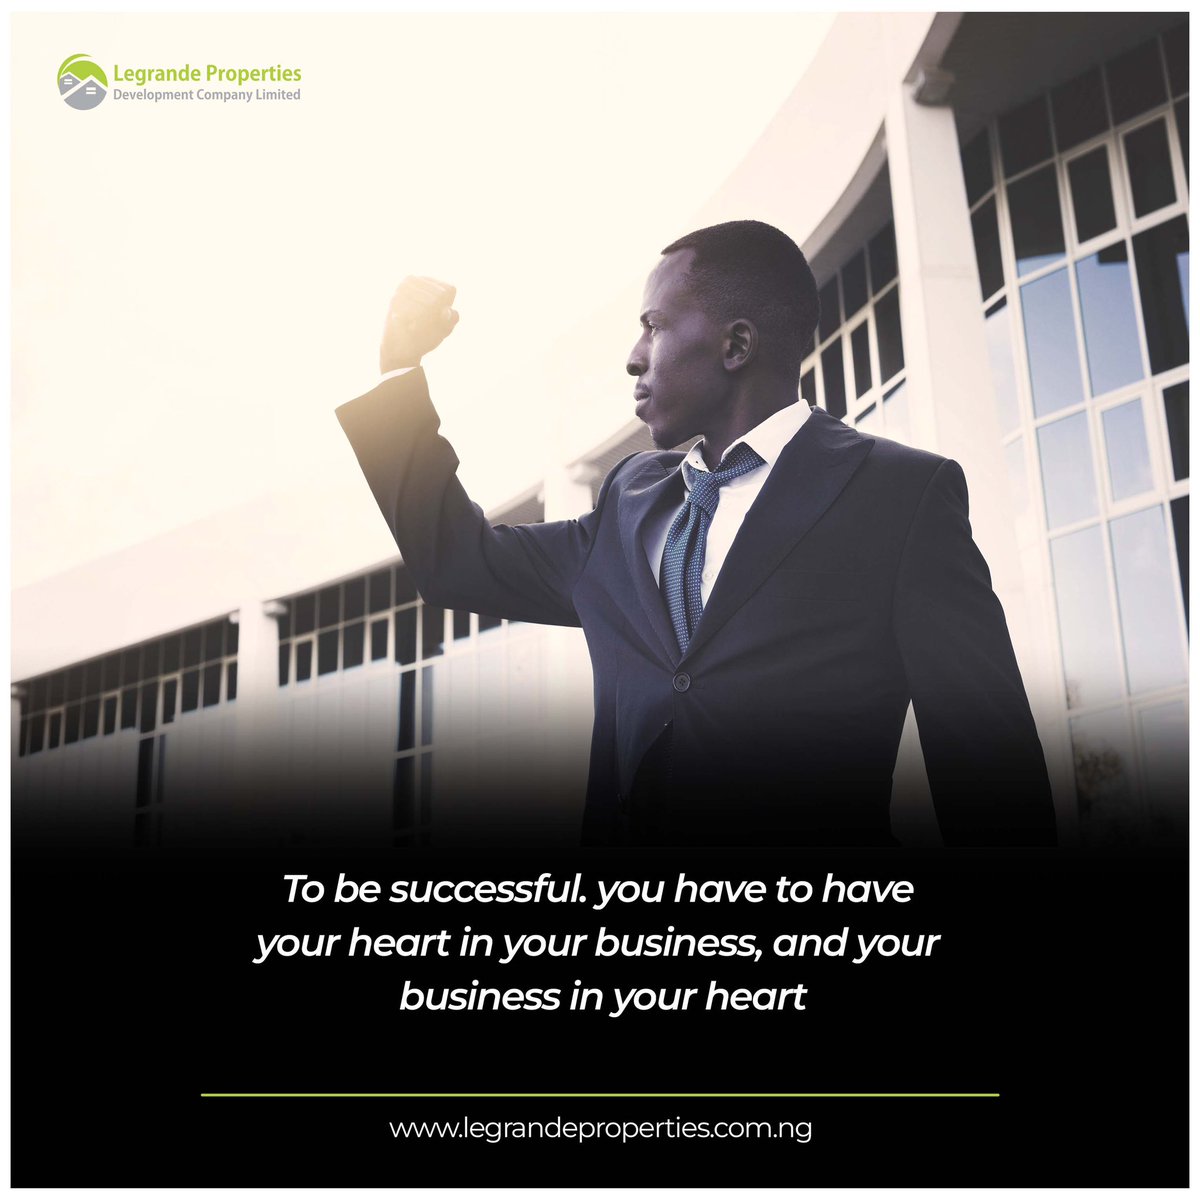 Success is not just about the numbers, it’s about the love and dedication you pour into your business. Follow your heart and watch your dreams come to life. .Happy new week !!

MotivationMonday #GoalGetter #StartNow #ProgressNotPerfection #TakeTheFirstStep #Dreamchaser ##Dreams